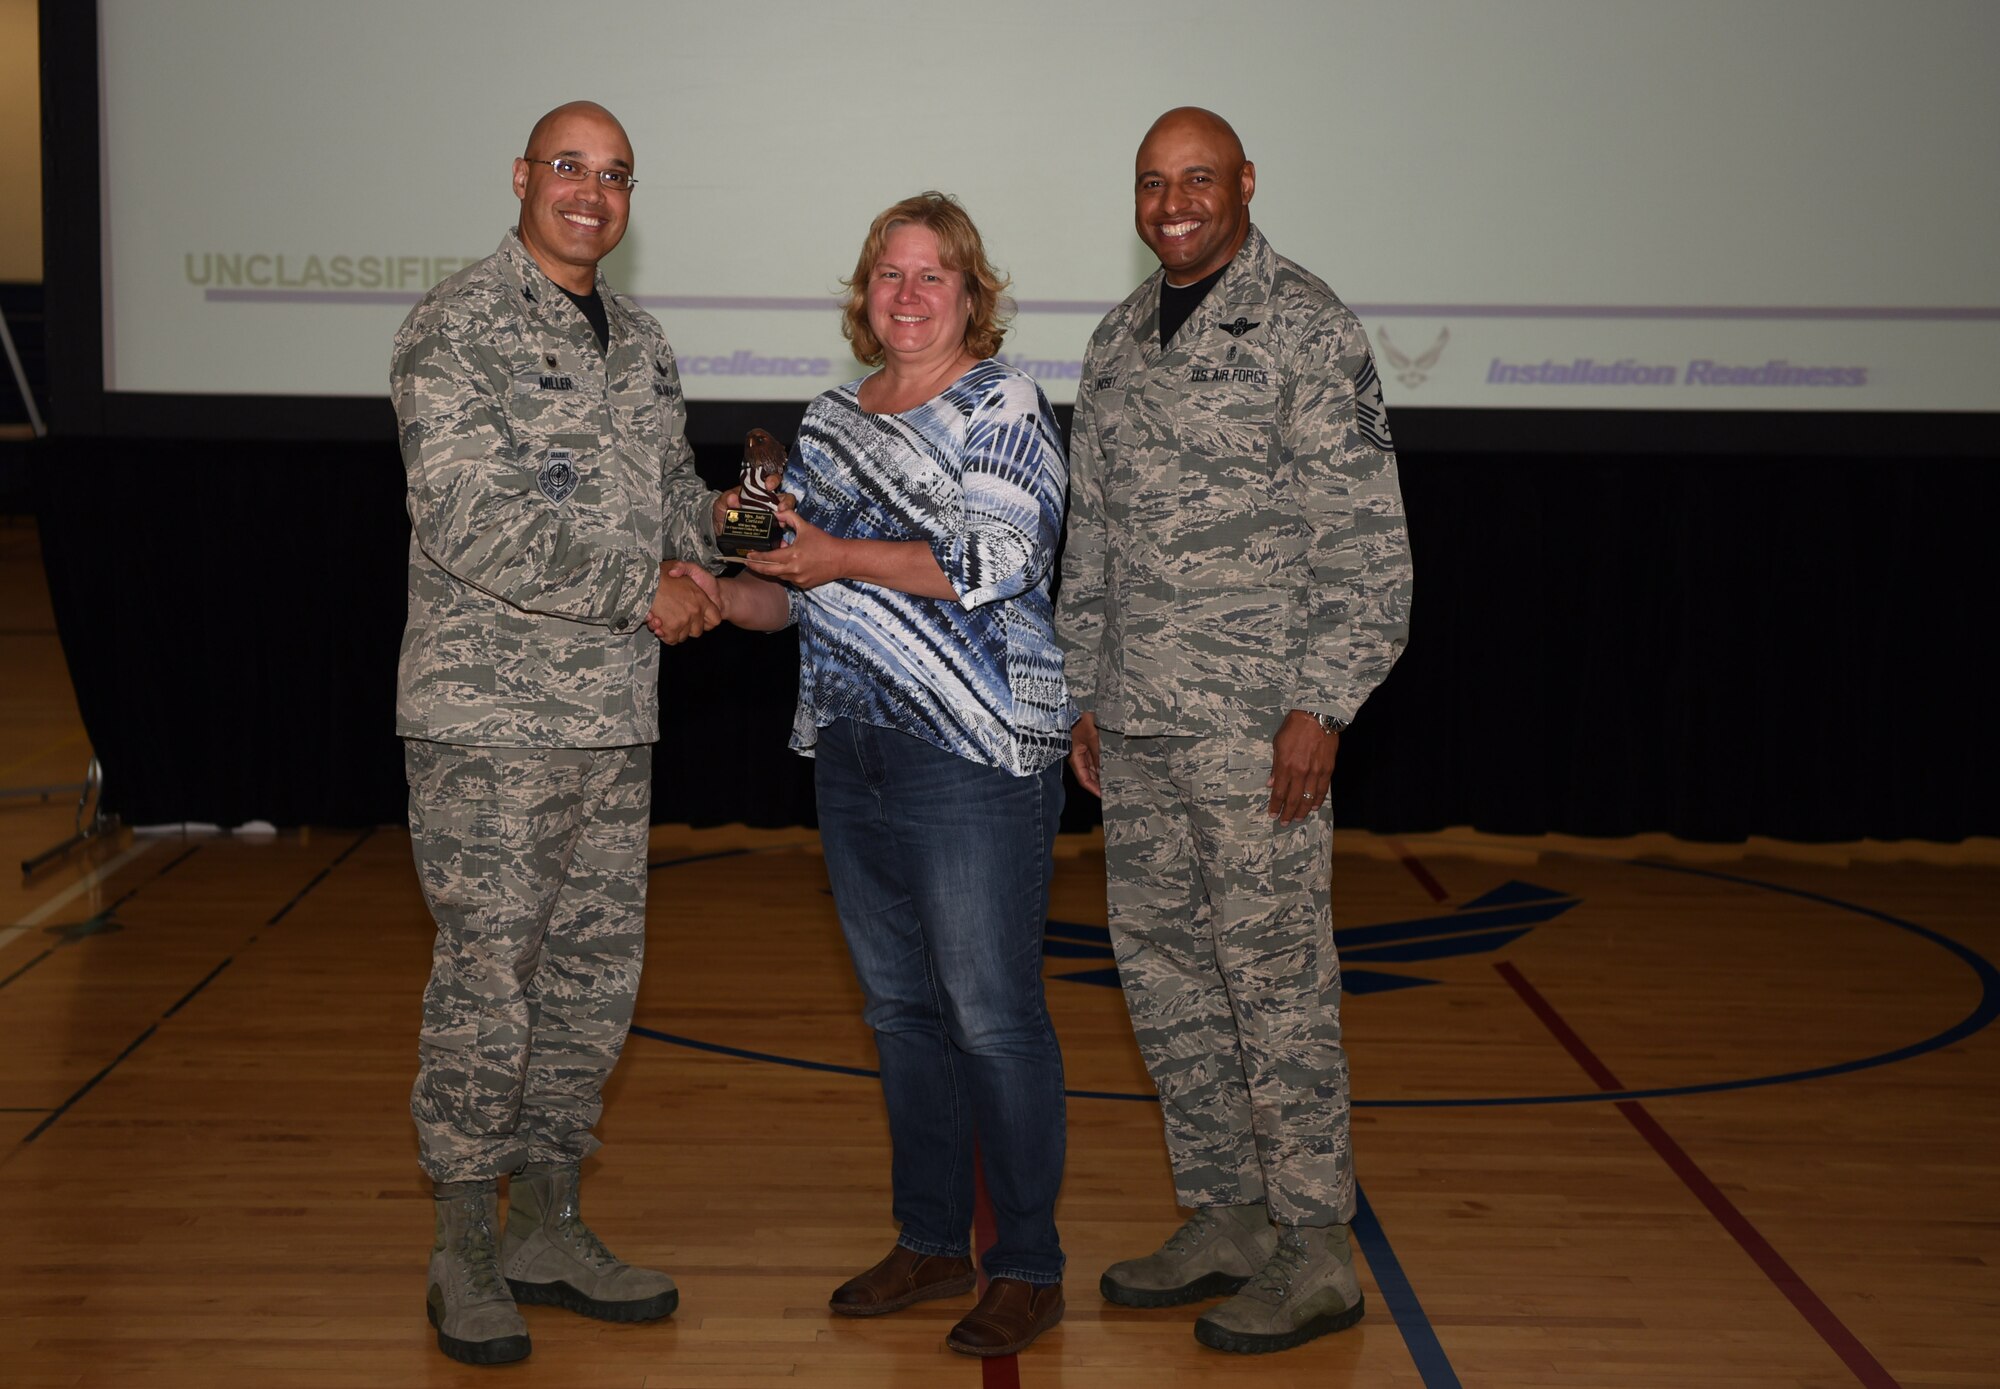 Judy Corizzo, 460th Comptroller Squadron budget officer, receives the Category II Supervisory Civilian of the Quarter Award May 19, 2017, on Buckley Air Force Base, Colo.  Awards were given to the Team Buckley members who showed dedication, hard work and exceeded their supervisor’s expectations. (U.S. Air Force photo by Airman 1st Class Holden S. Faul/ released)